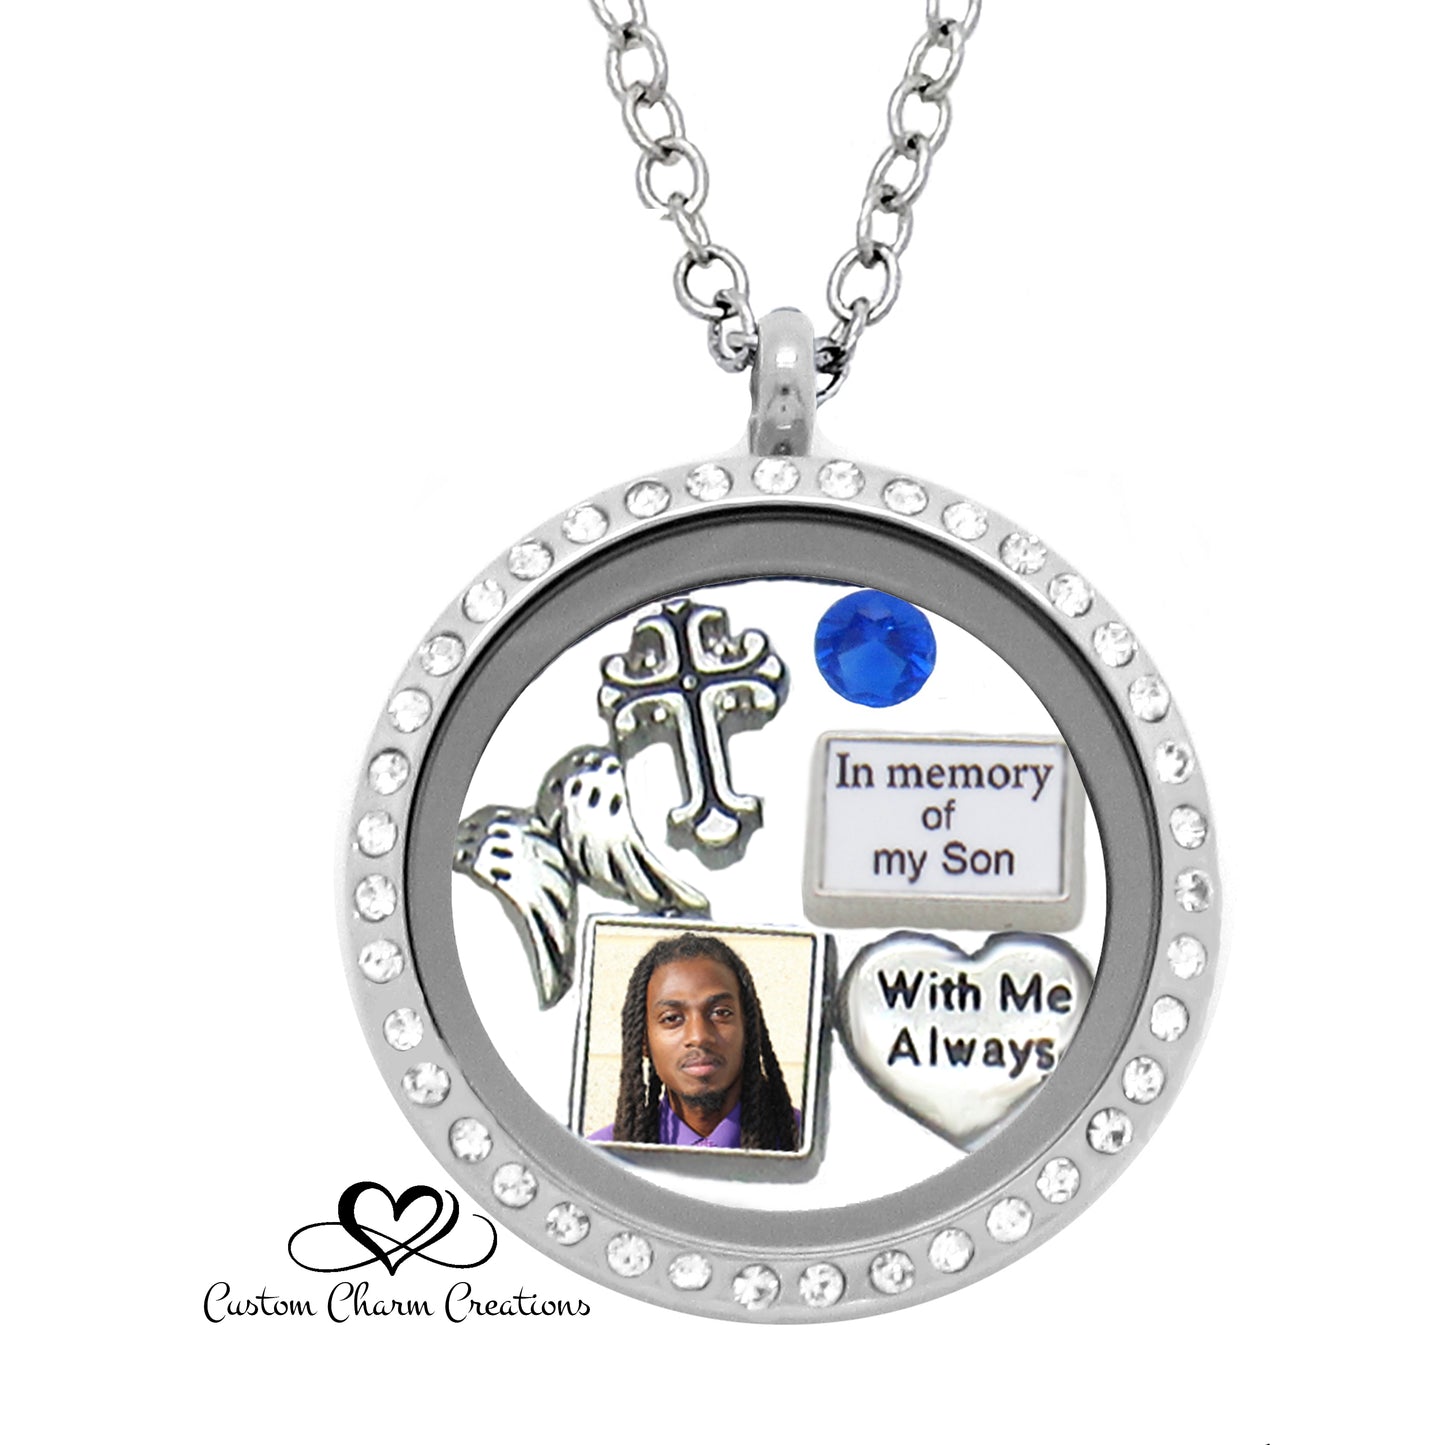 In memory of my Son Memorial Necklace Jewelry In Remembrance